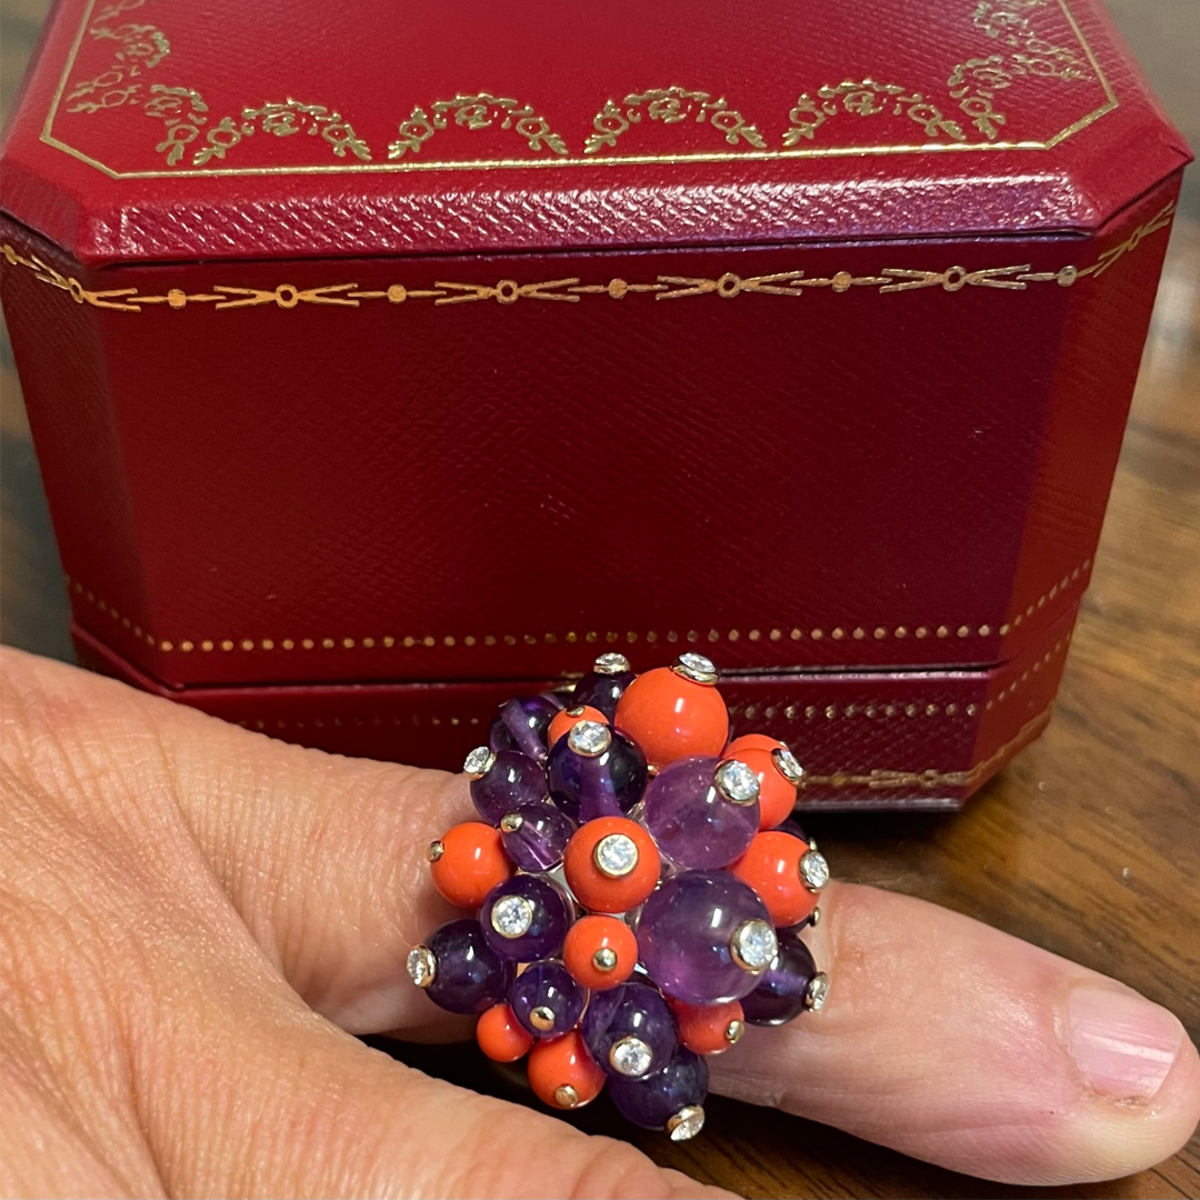 Cartier France 1970s 18KT Yellow Gold Coral, Amethyst & Diamond Pom-Pom Ring worn on finger